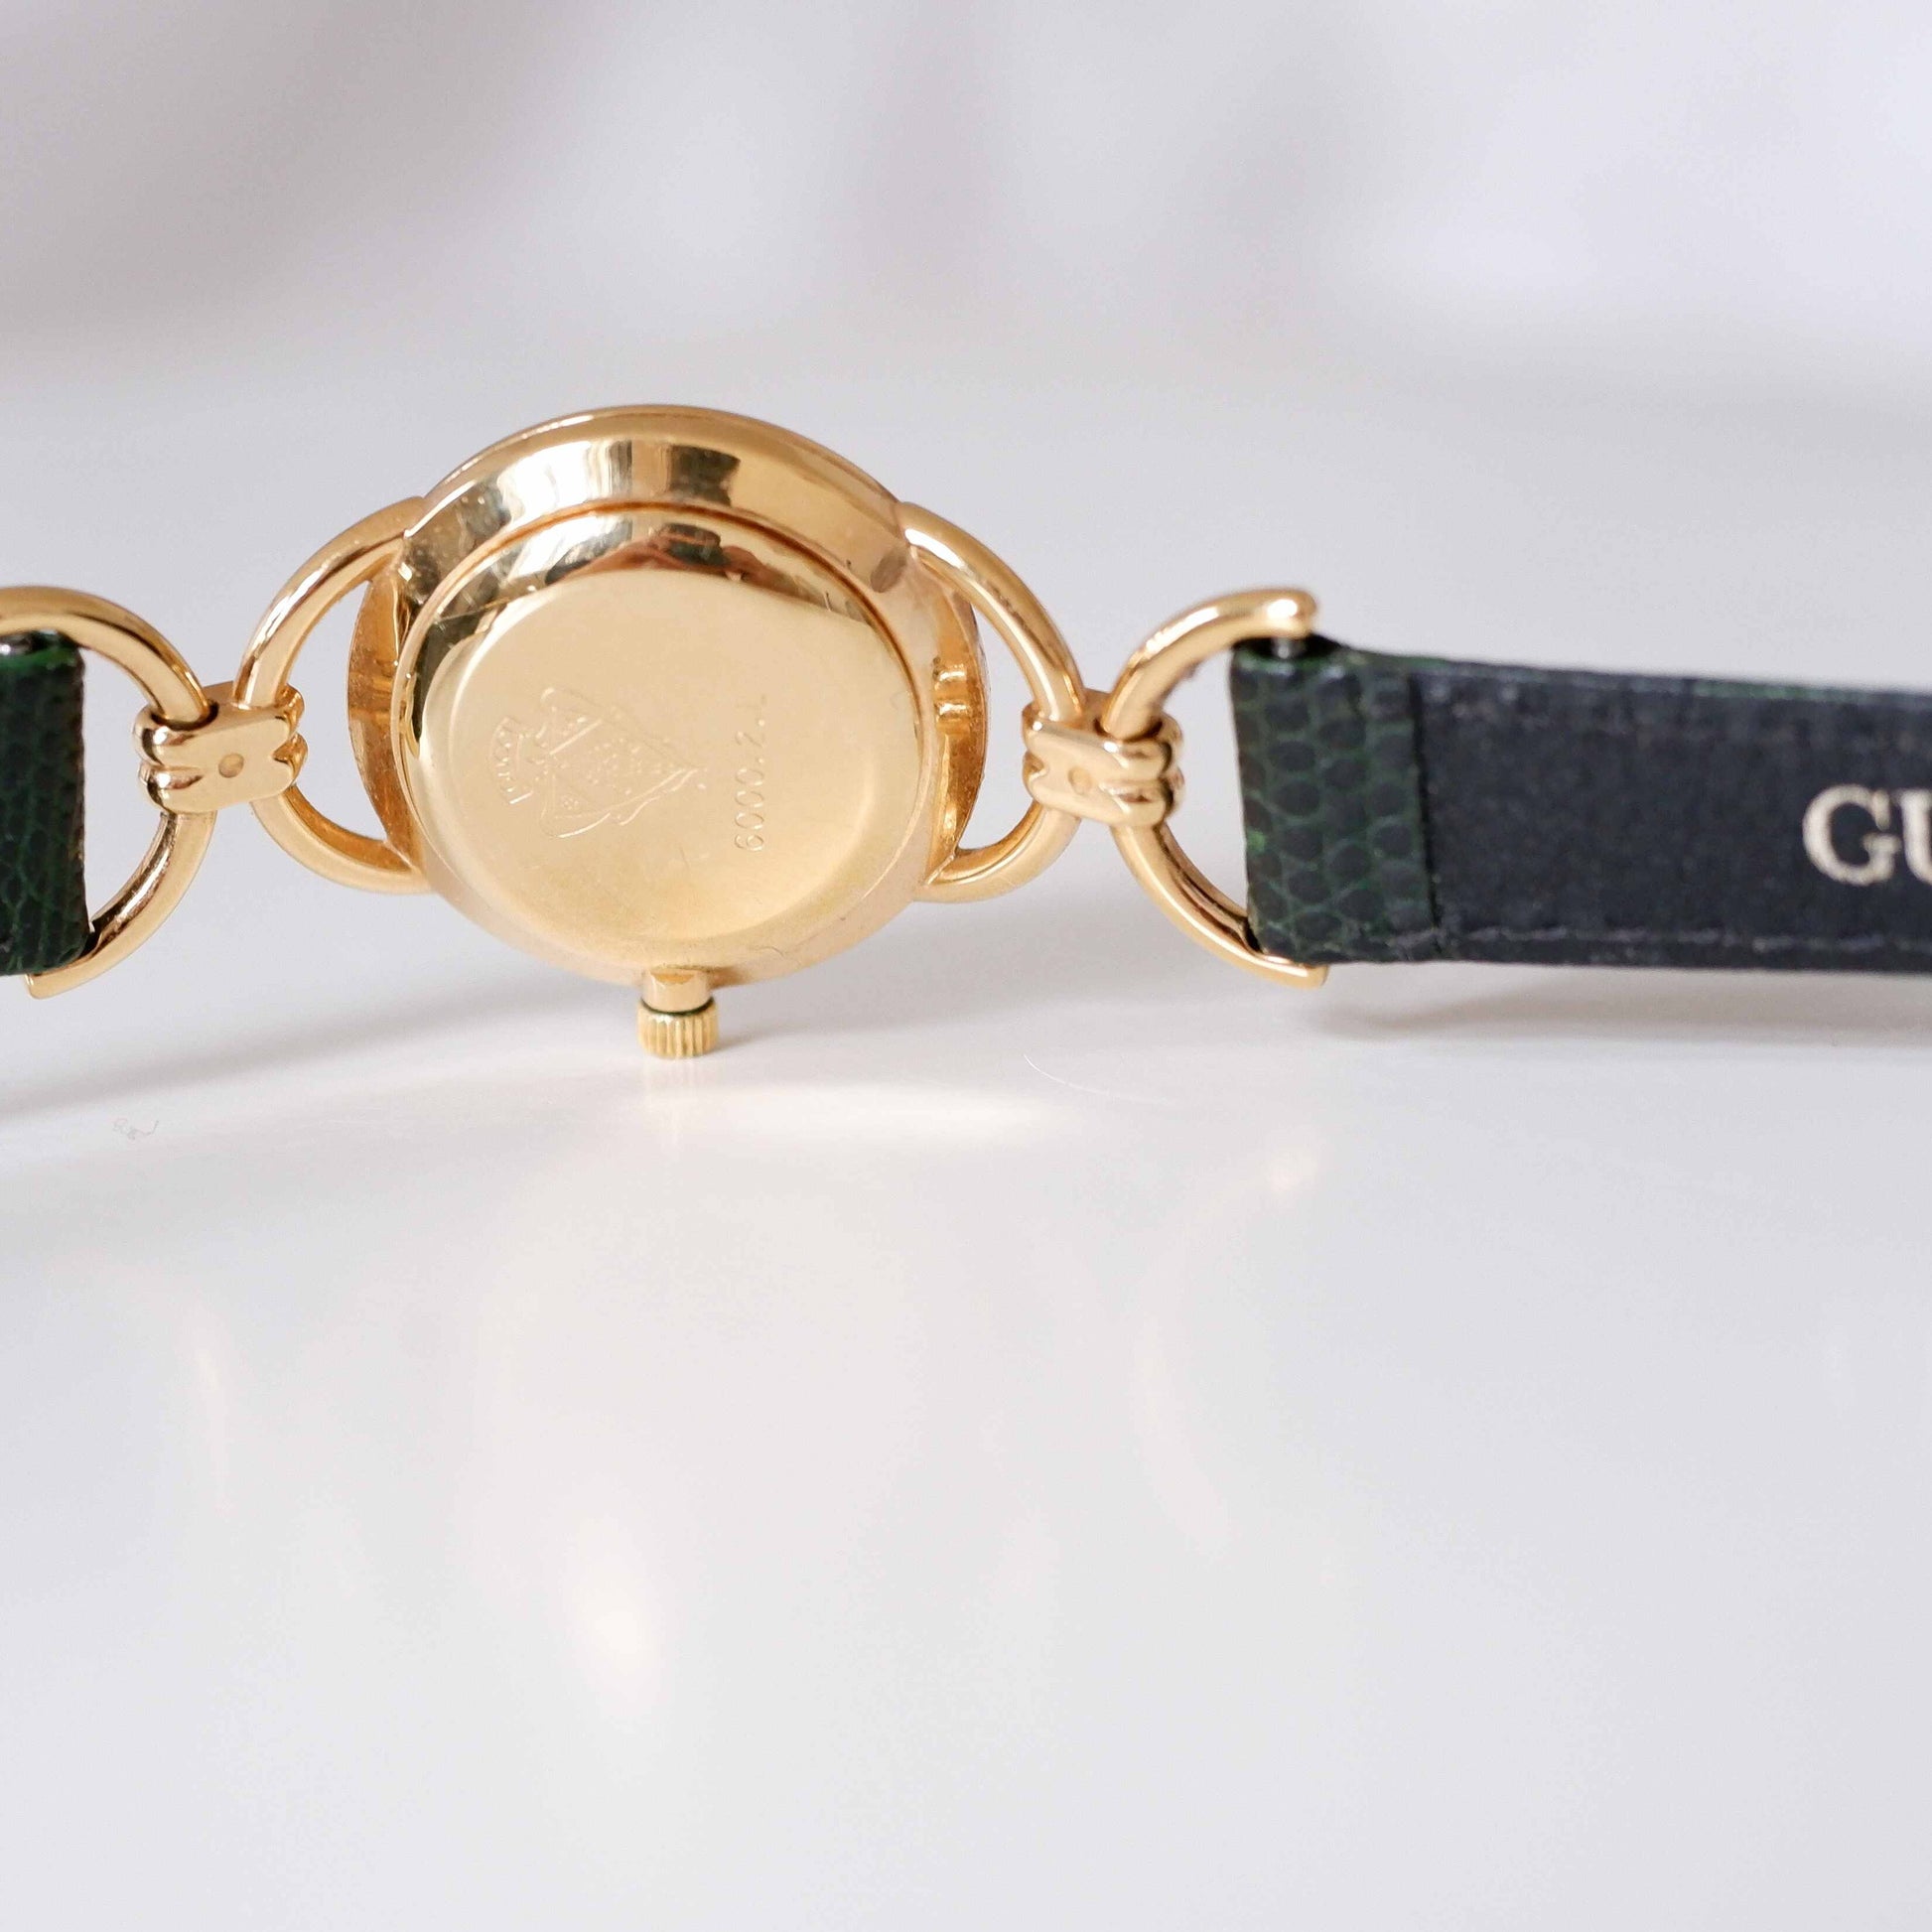 Gucci 6000.2.l Vintage Ladies Watch: 90s Gold Mother of Pearl Dial, Back Side